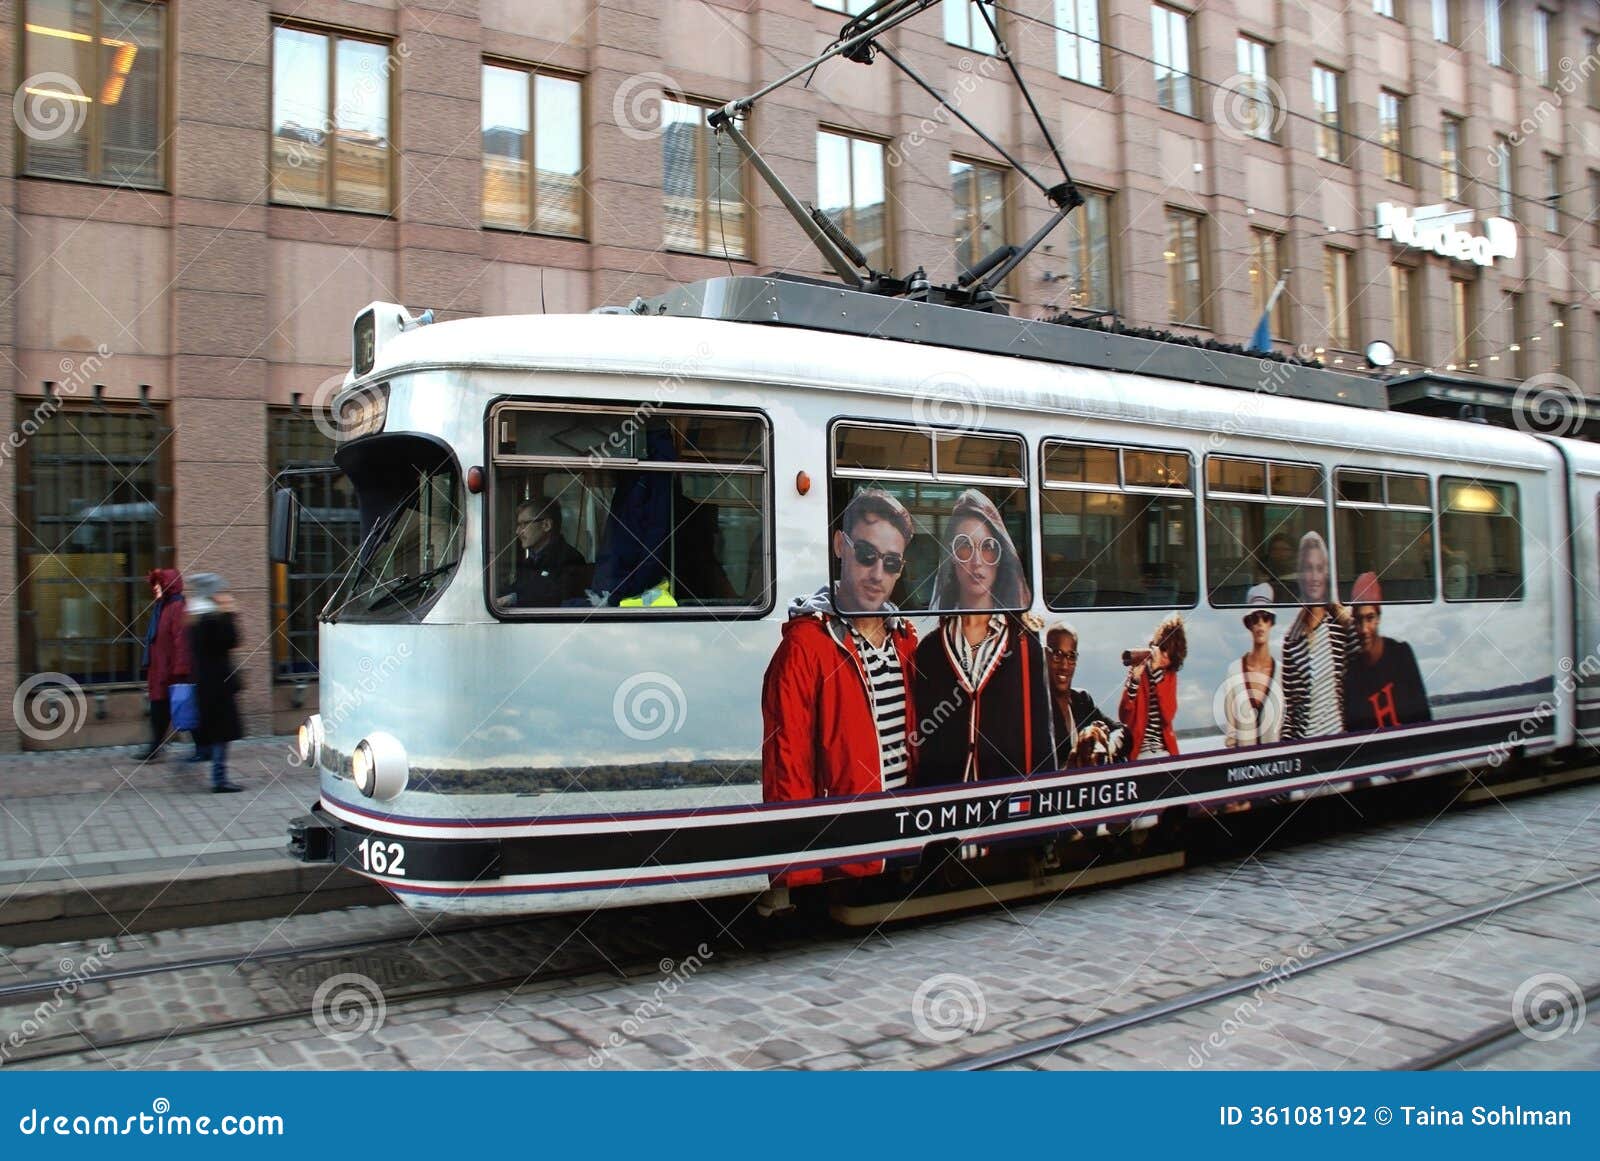 Moving HSL Tram with Tommy Hilfiger Advertisement Editorial